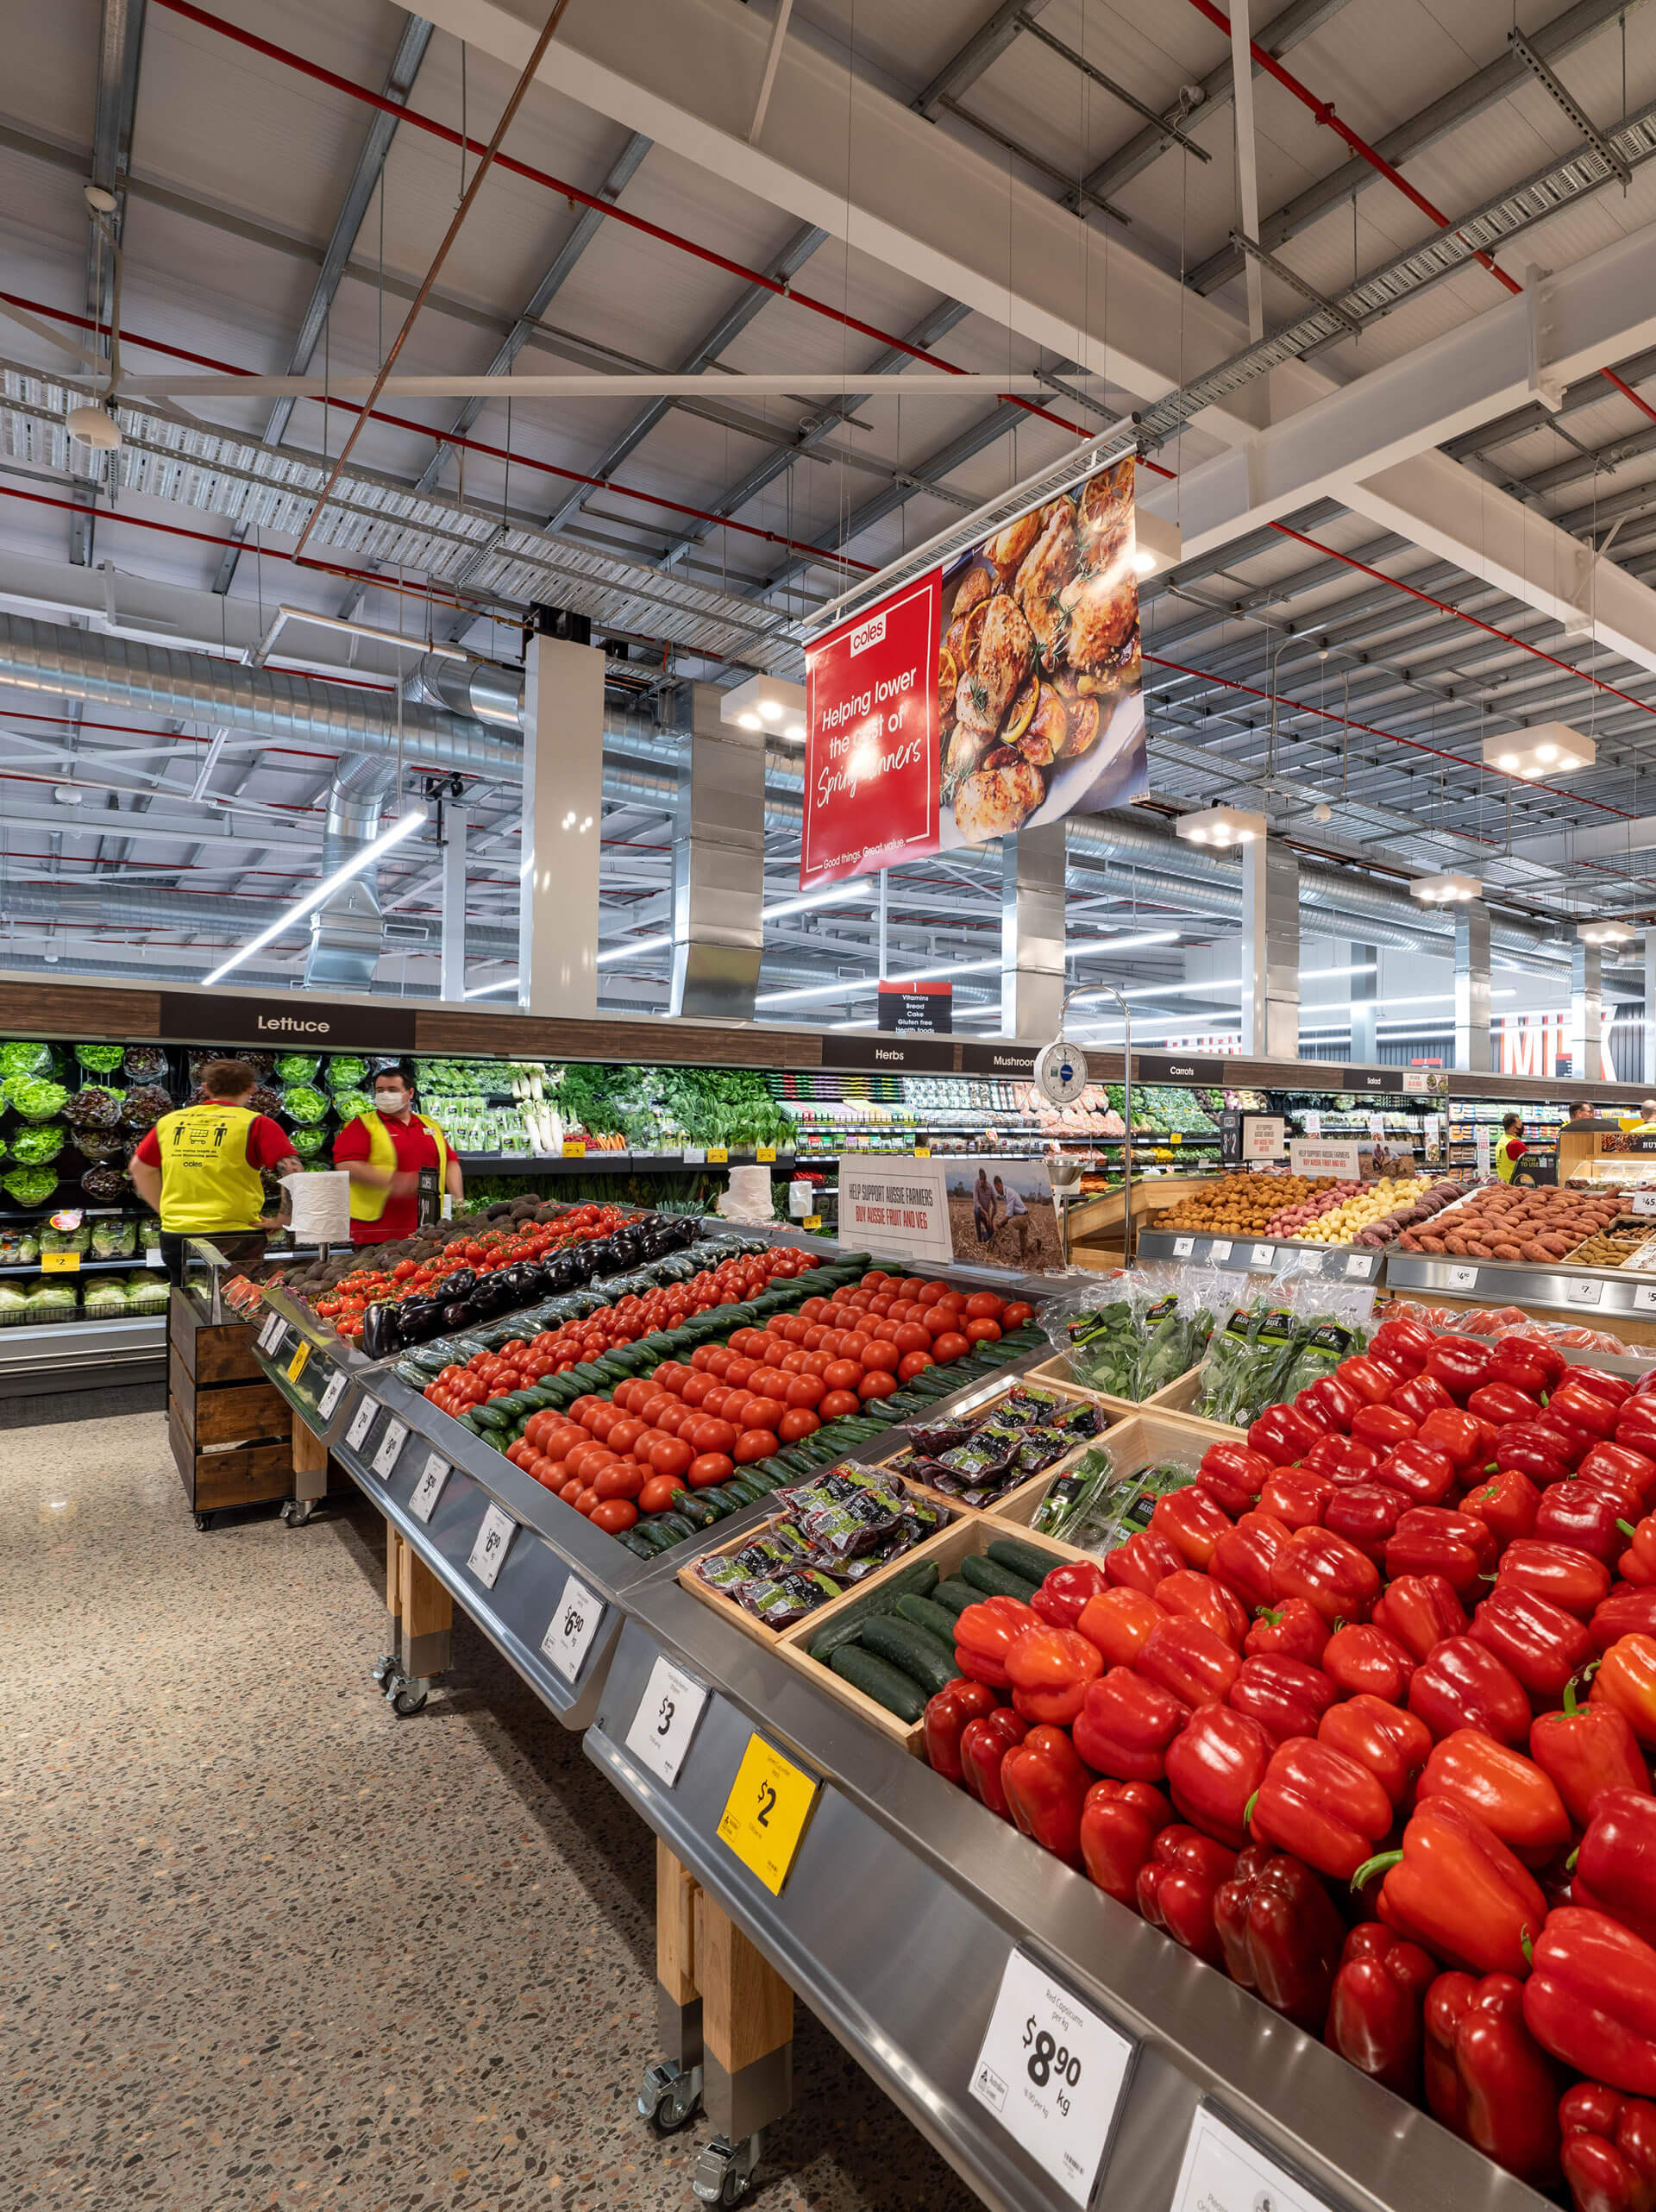 10 fruit and vegetables at coles huntlee taylor construction retail